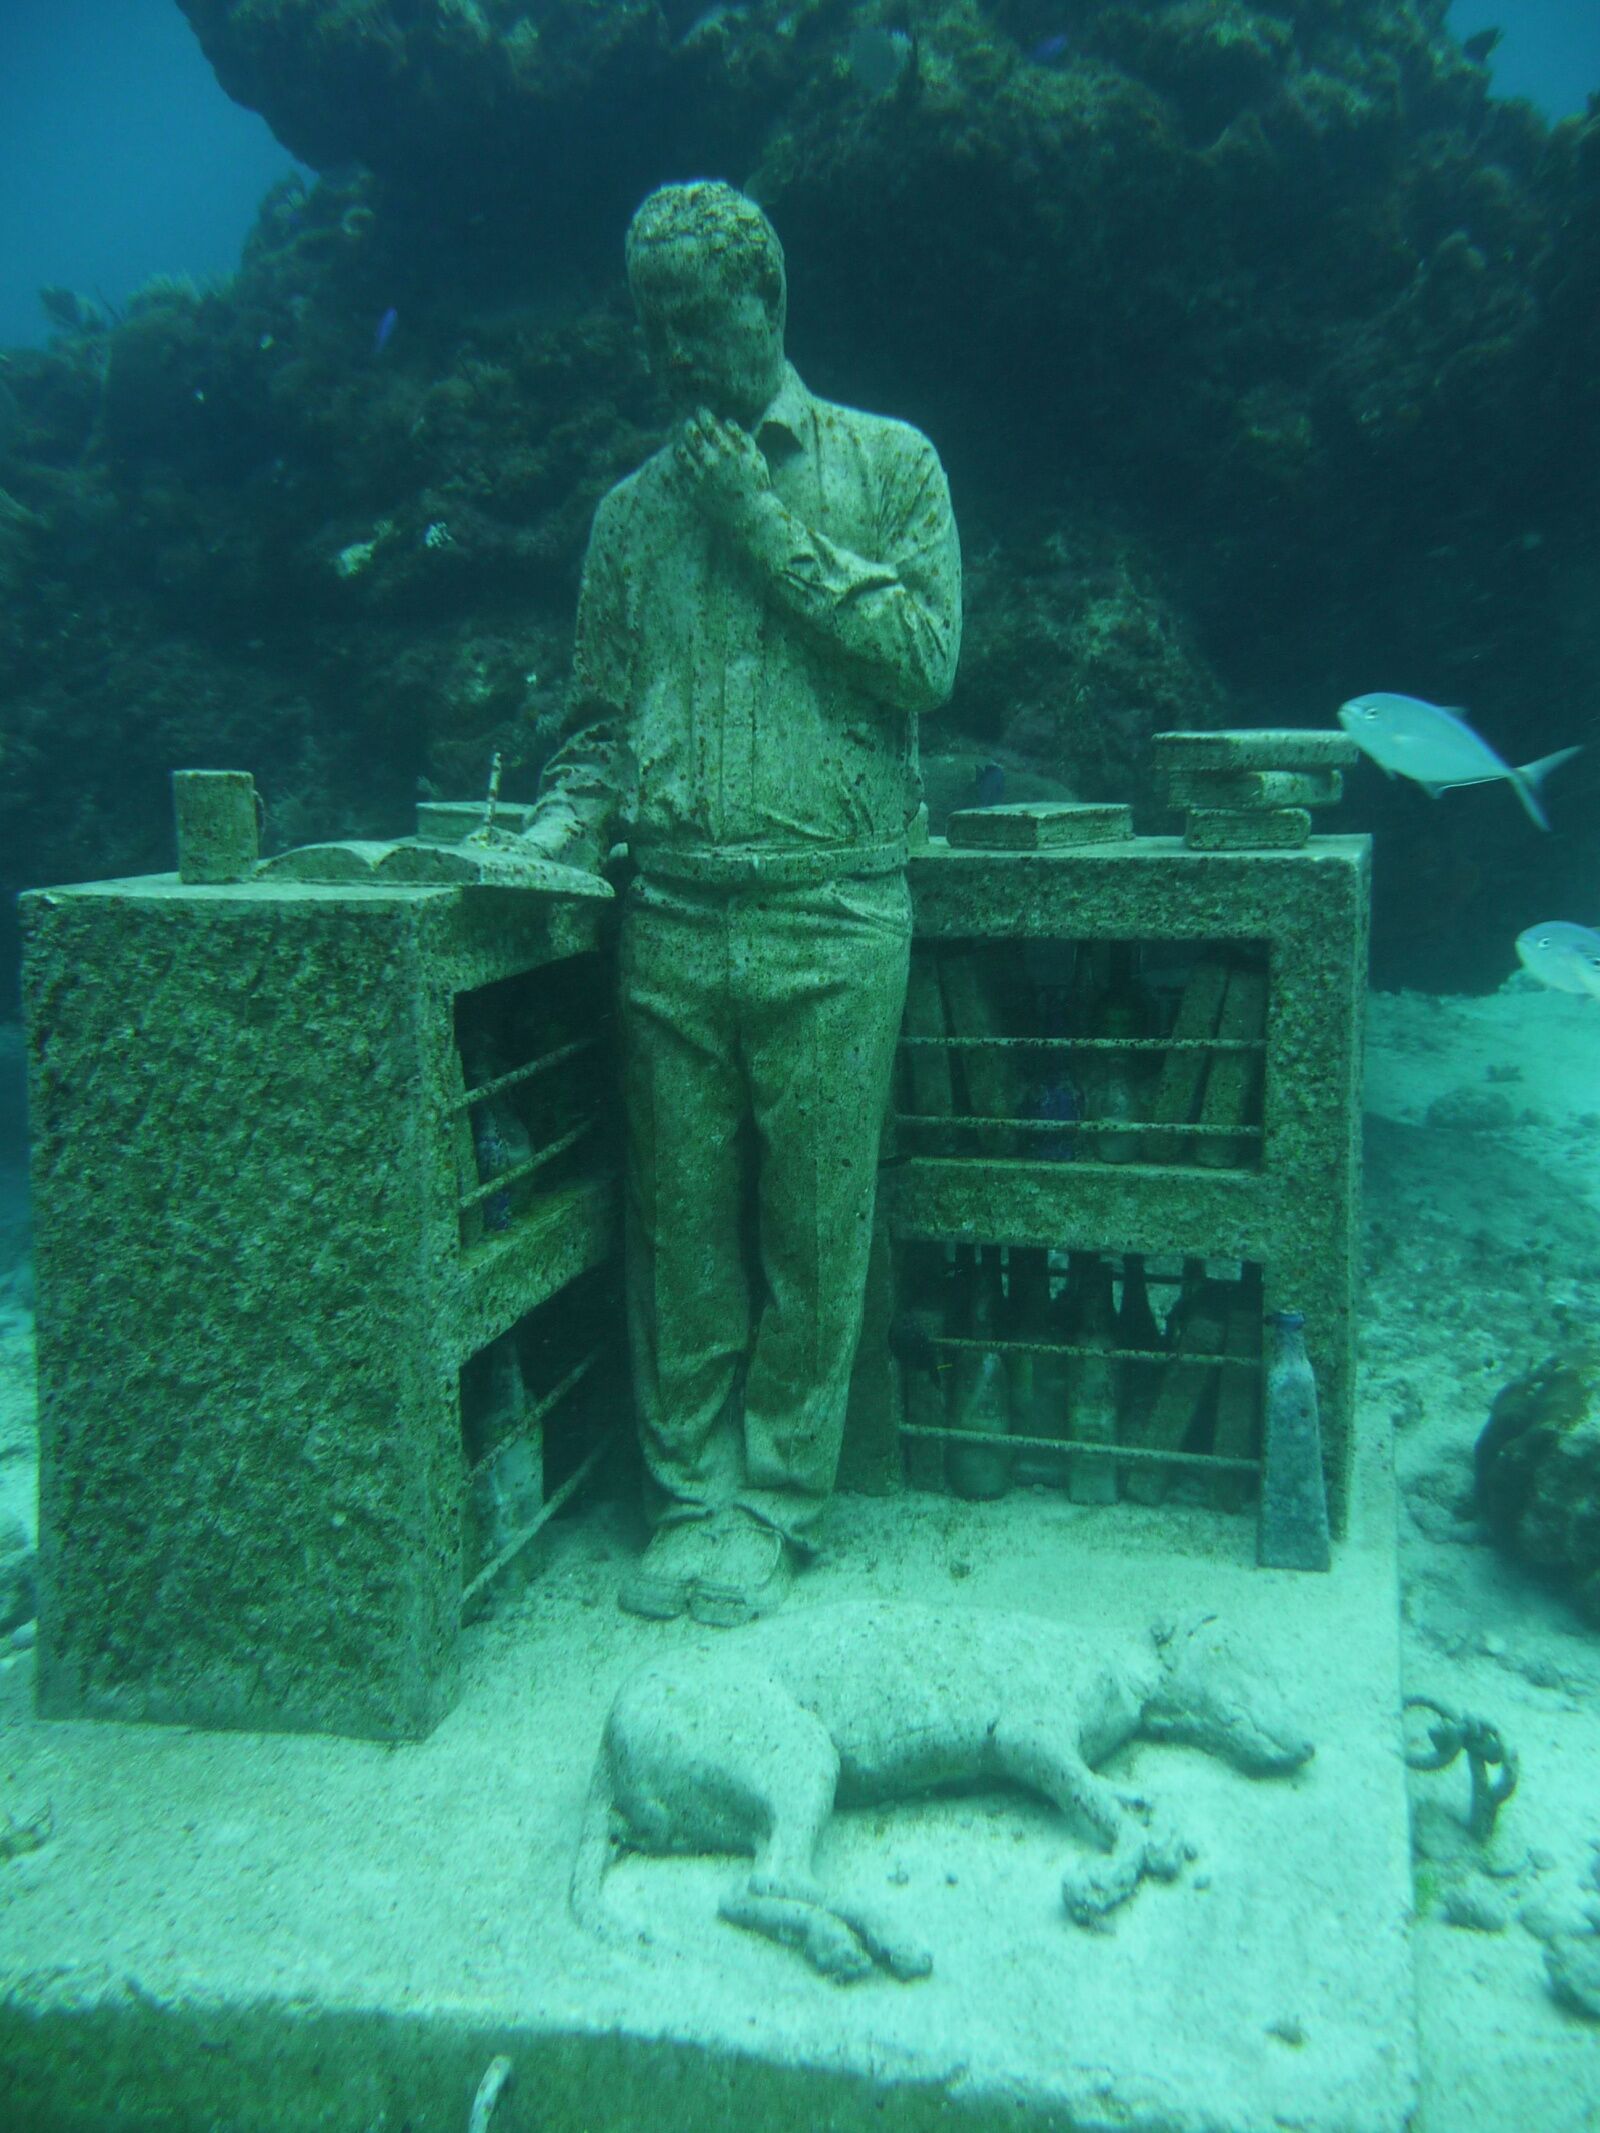 Cancun underwater museum sculpture of guy at a desk